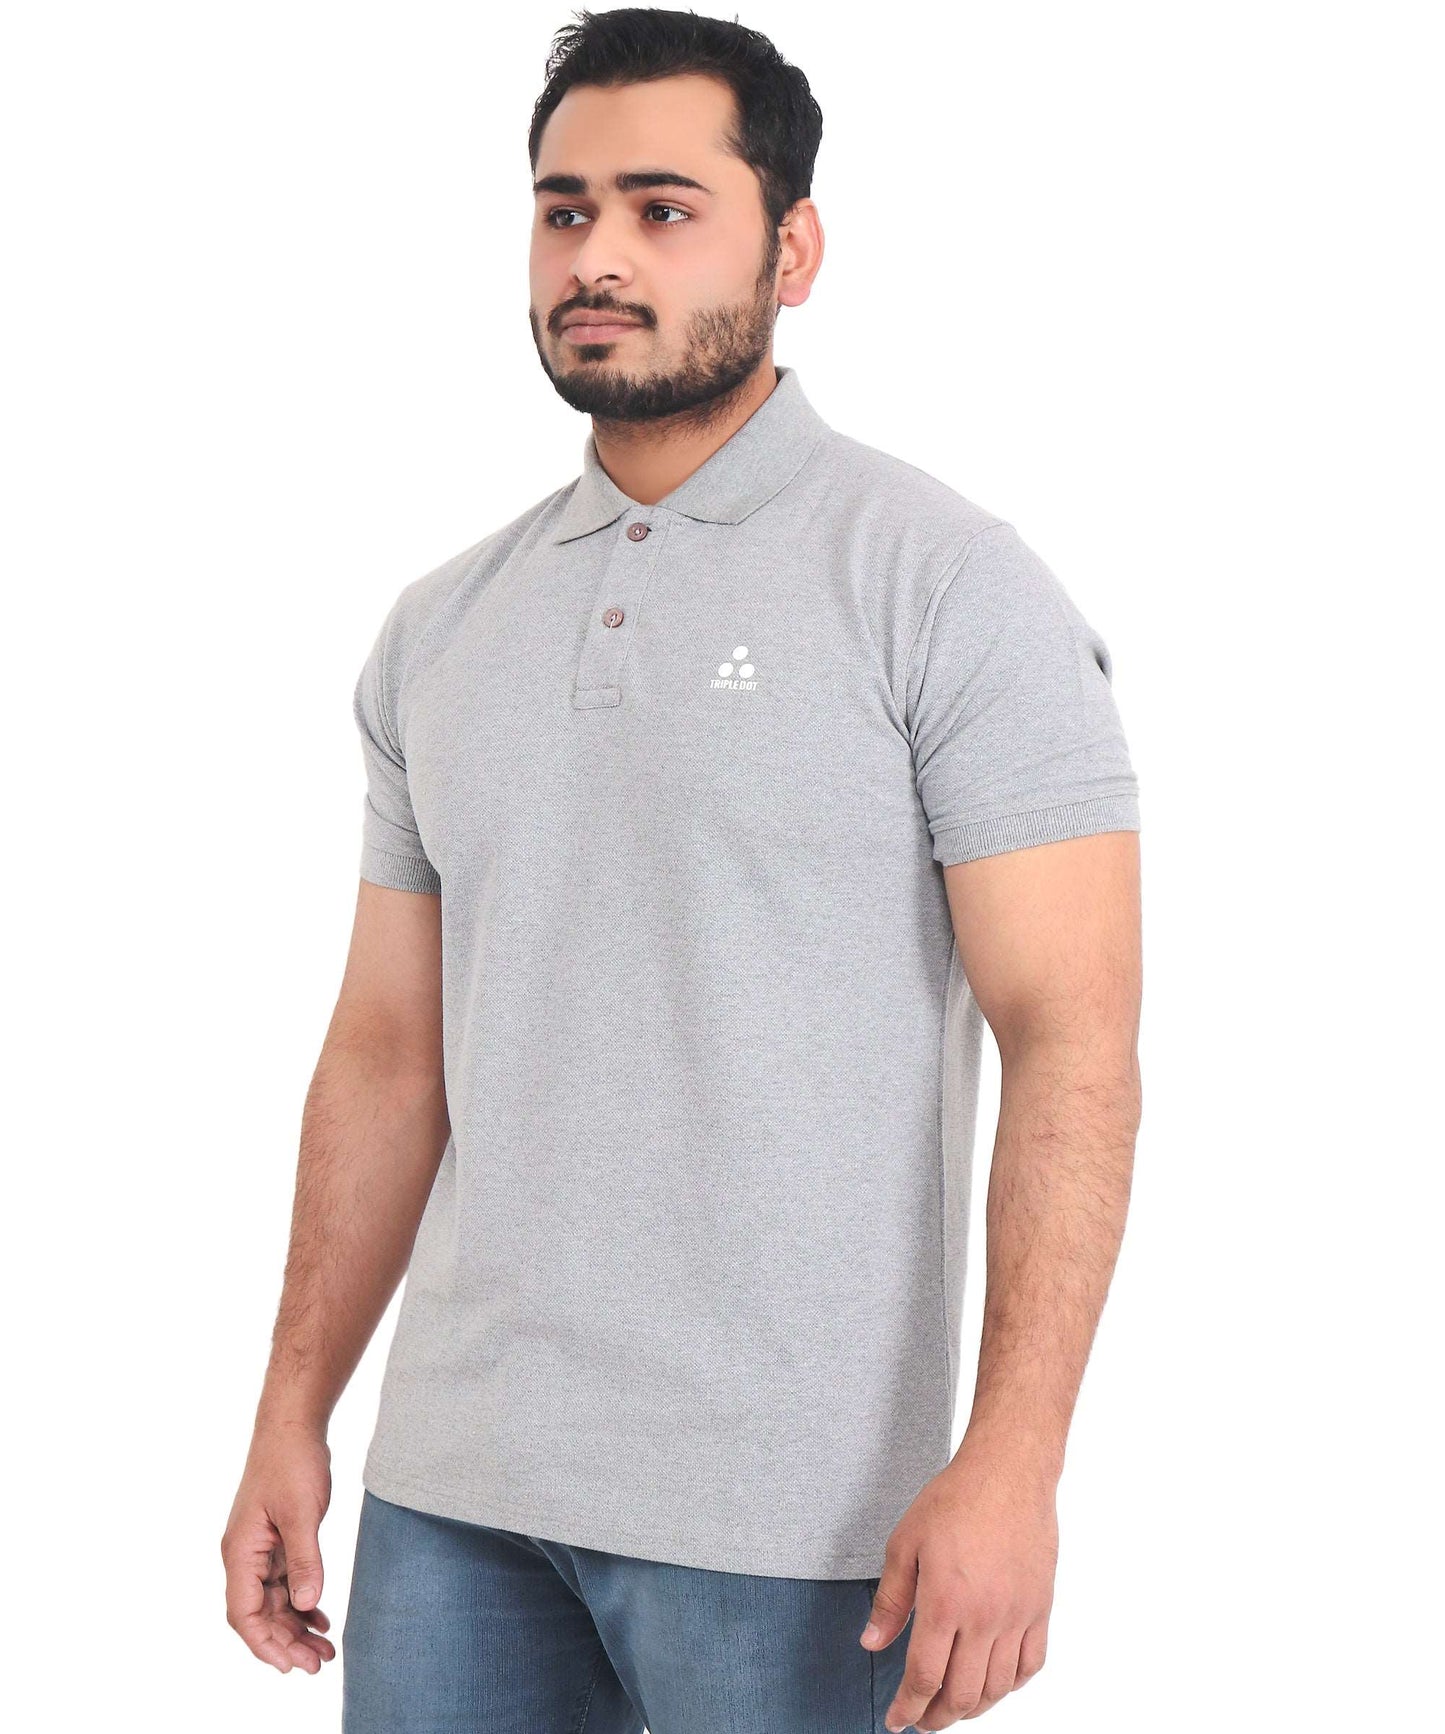 Soft Polycotton Polo Neck T-shirt for Men in Grey